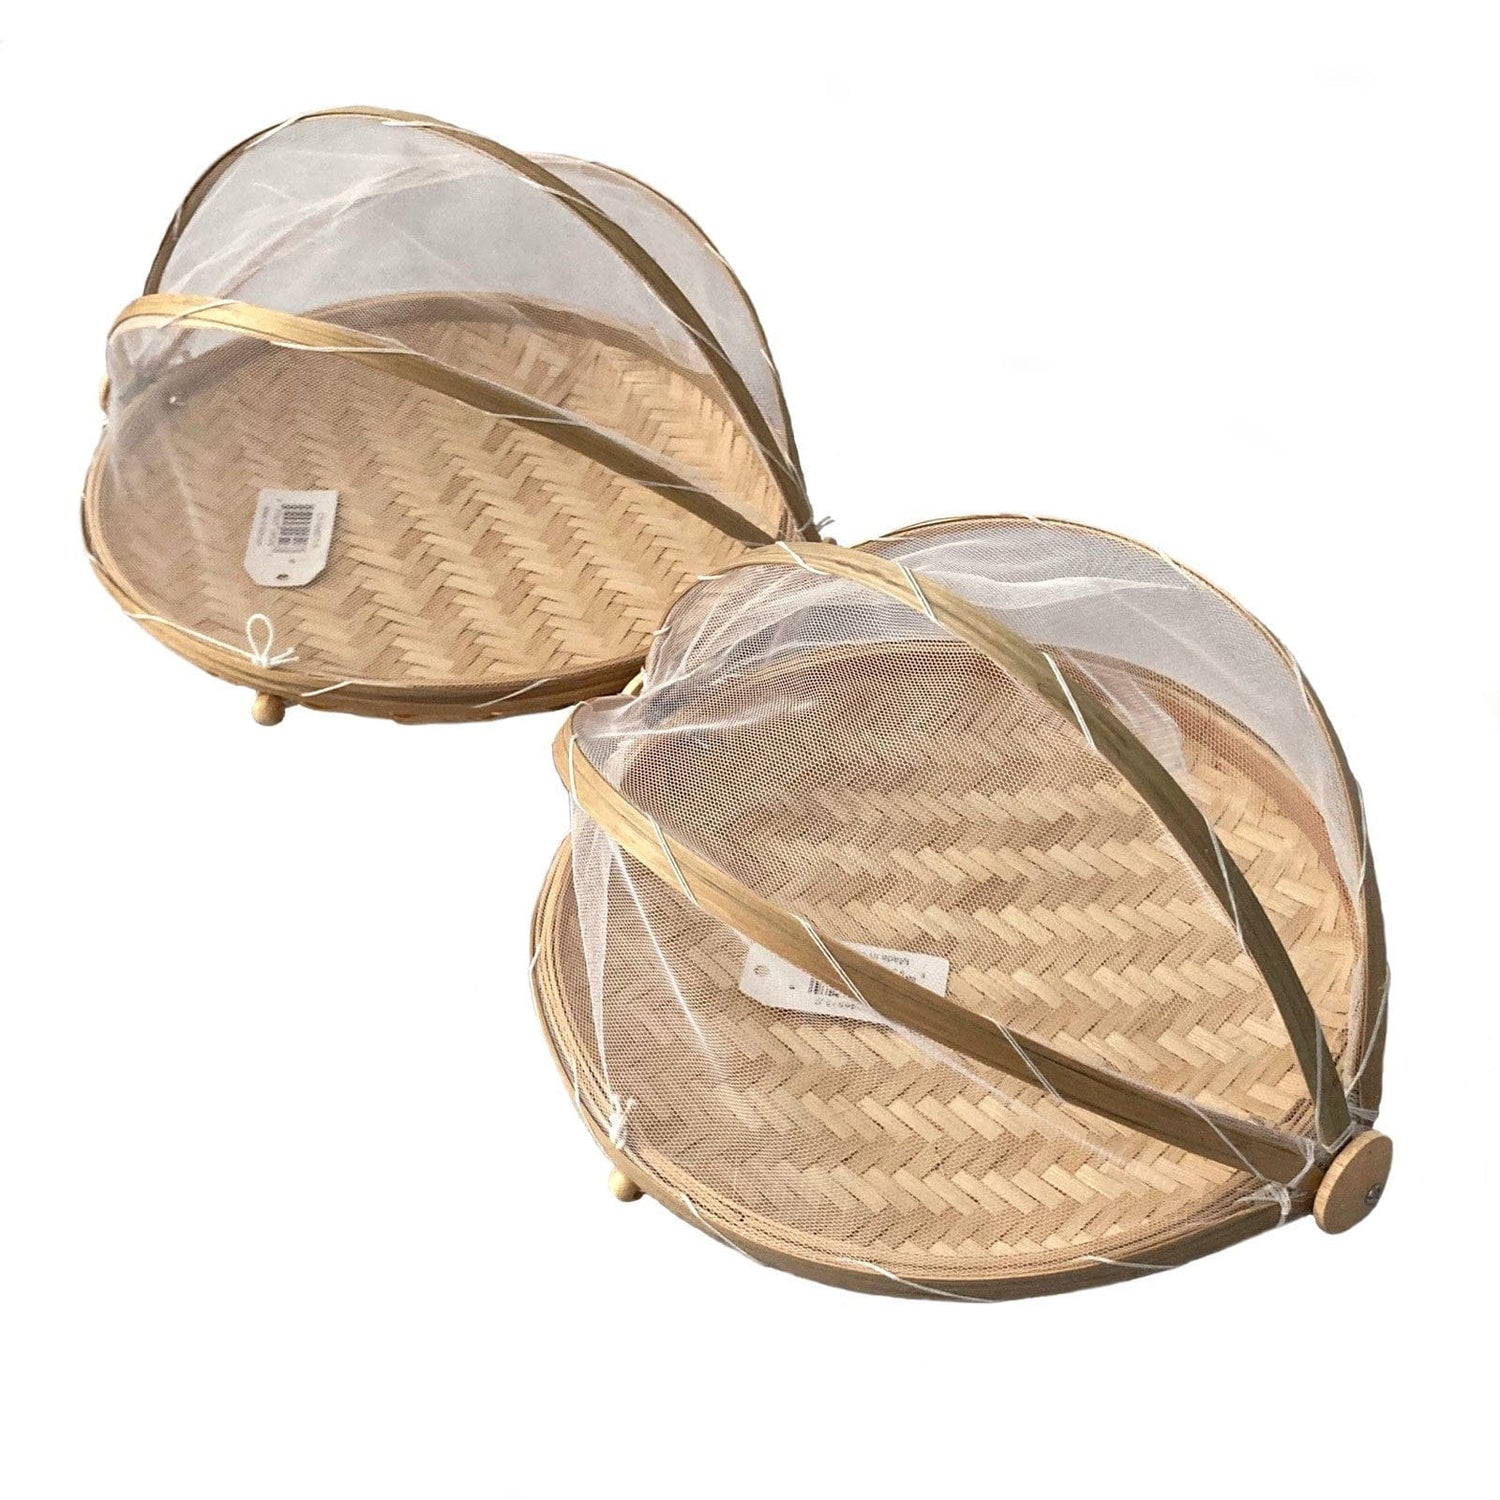 Set of 2 Mesh Food Cover with Bamboo Tray